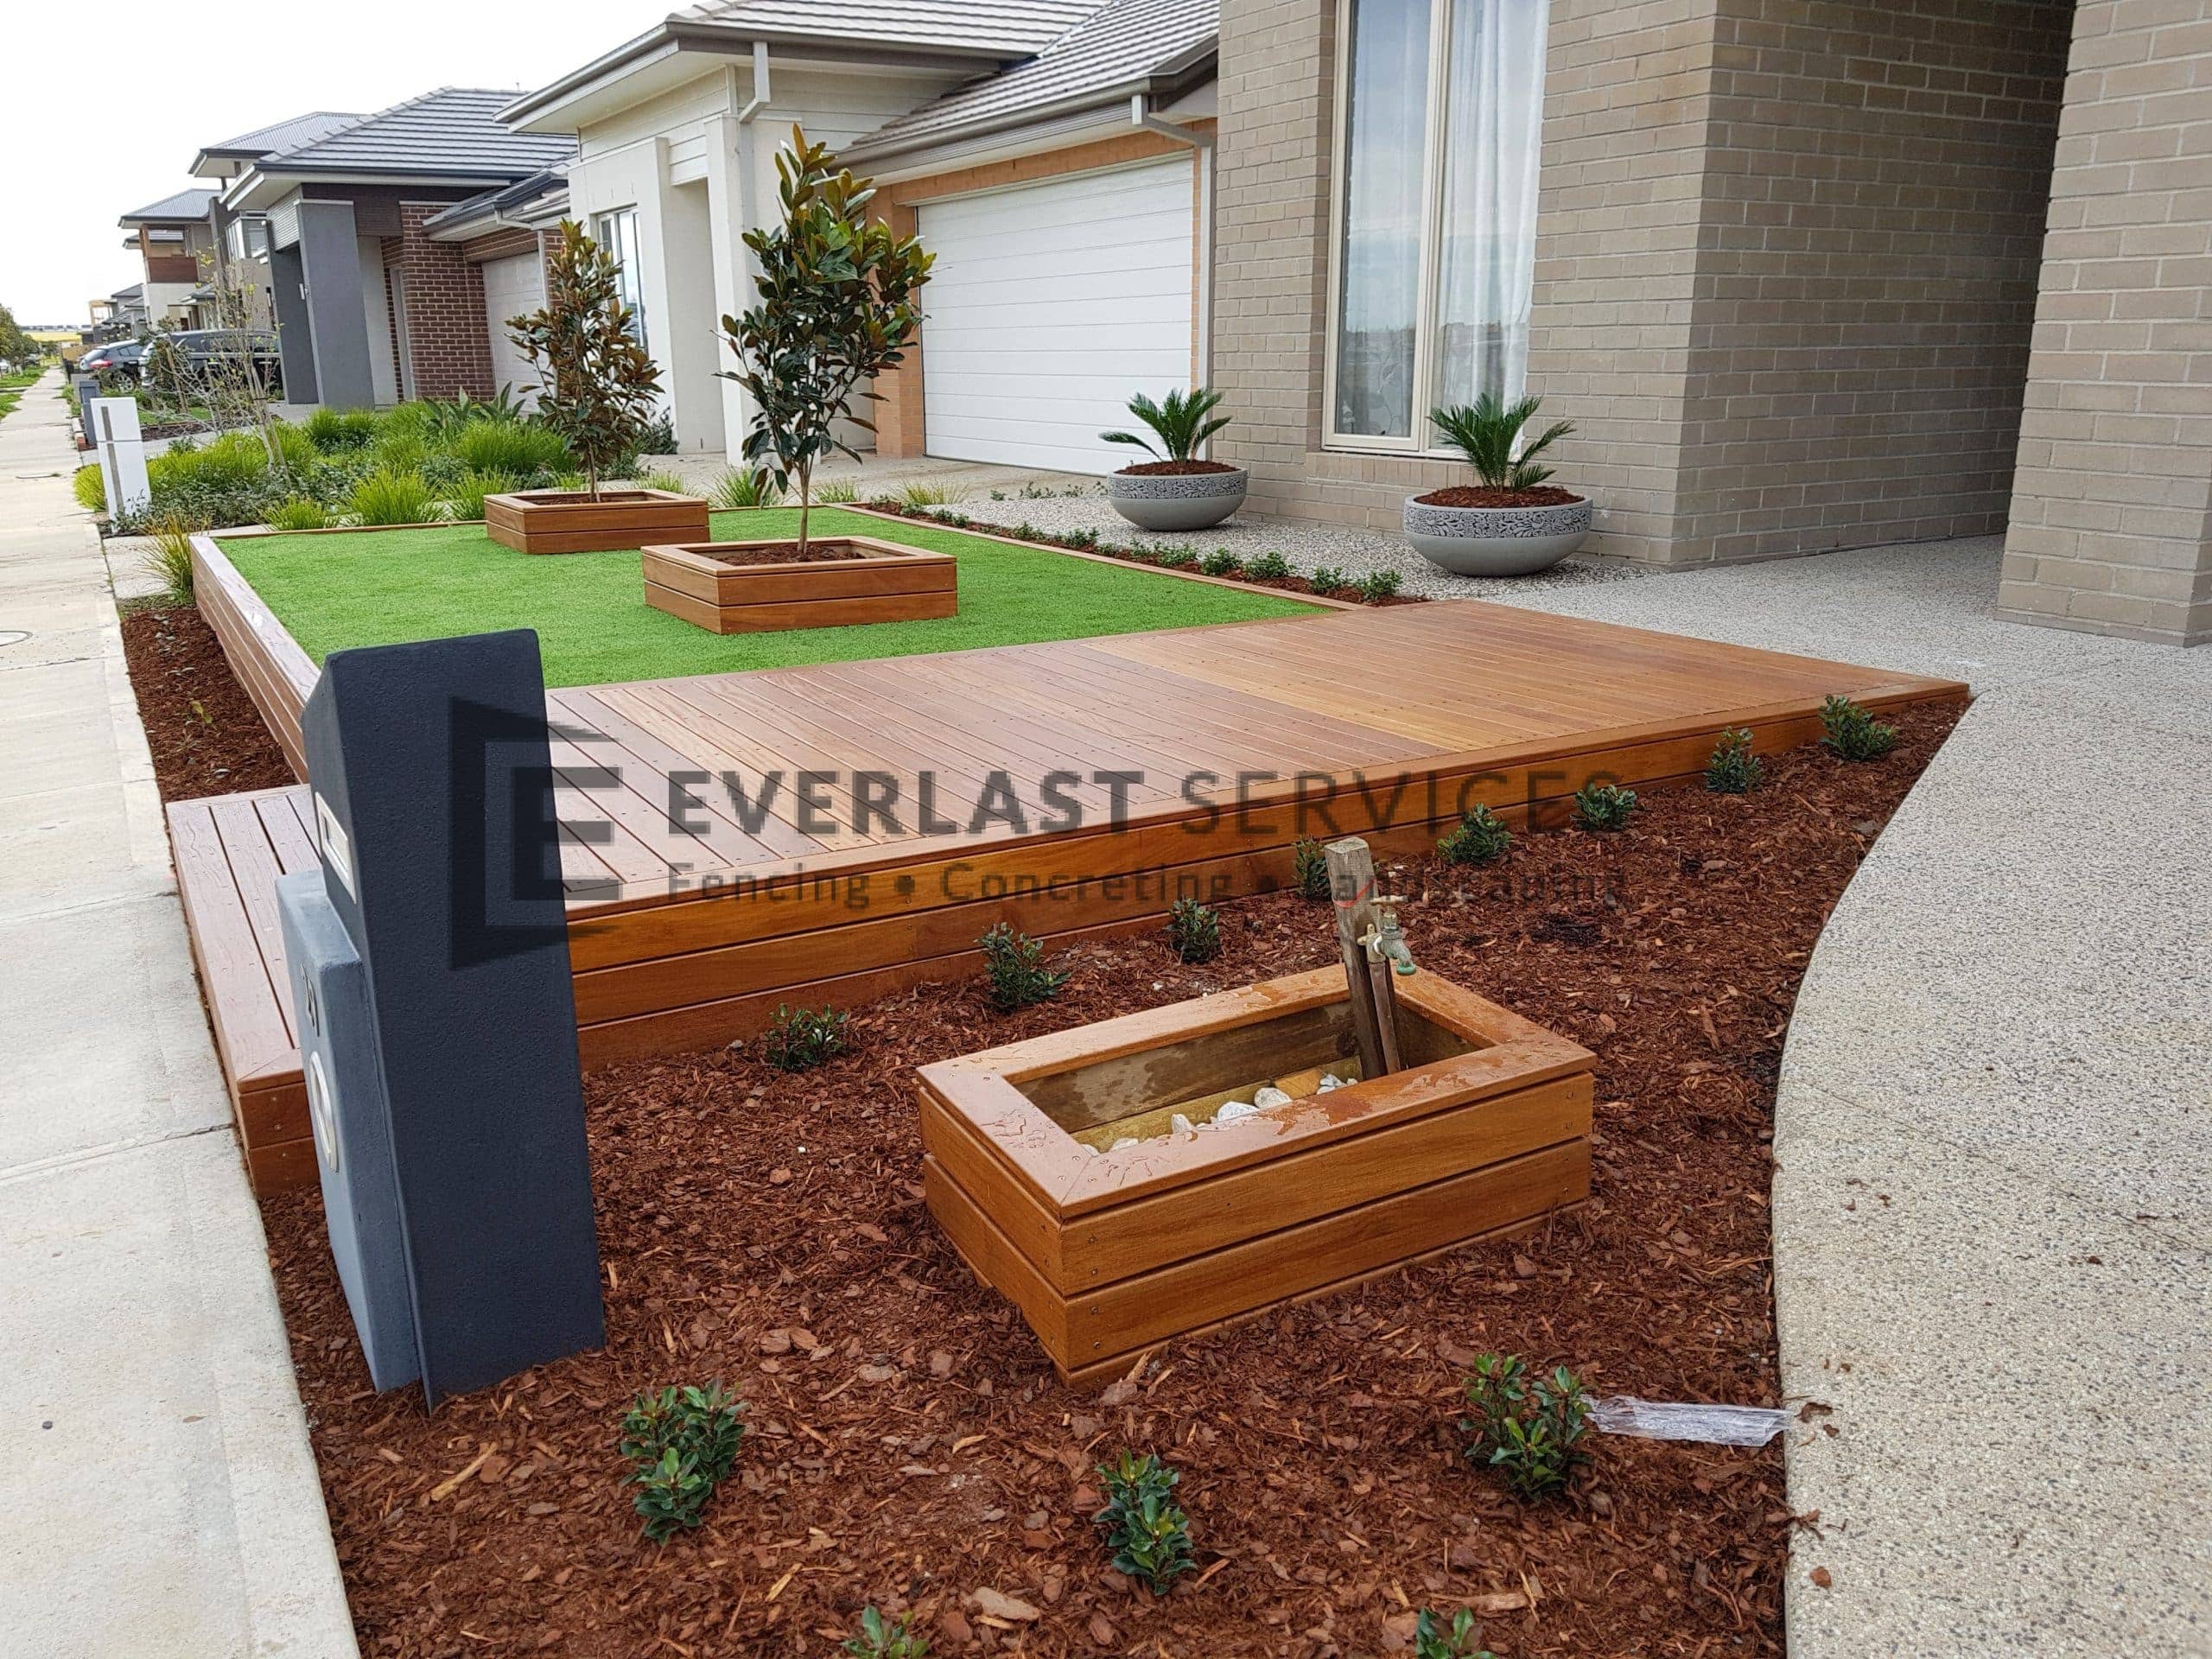 Using Your Garden To Add Value To Your Home Everlast Services